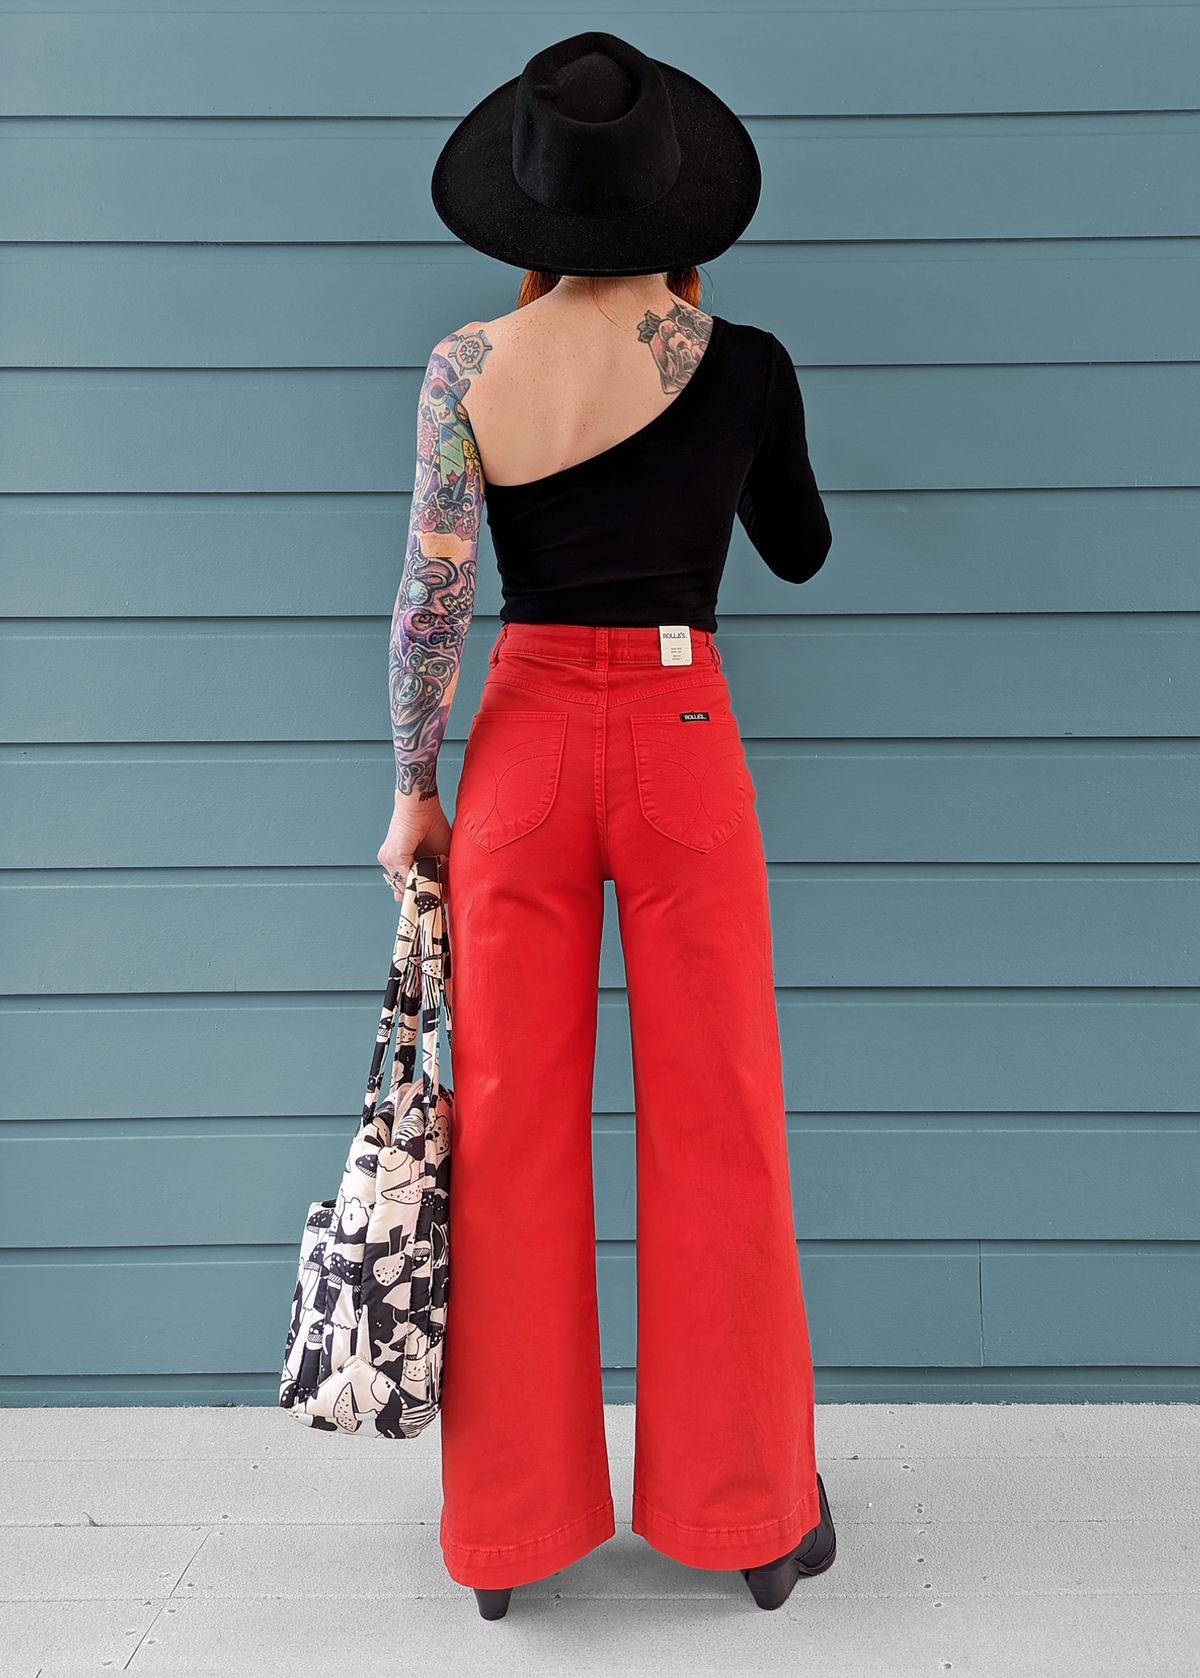 70s inspired Blood Orange Red high rise waist Sailor Patch Front Pocket Stretch Cotton Denim Ankle Length Wide Leg Pants by Rolla's Jeans